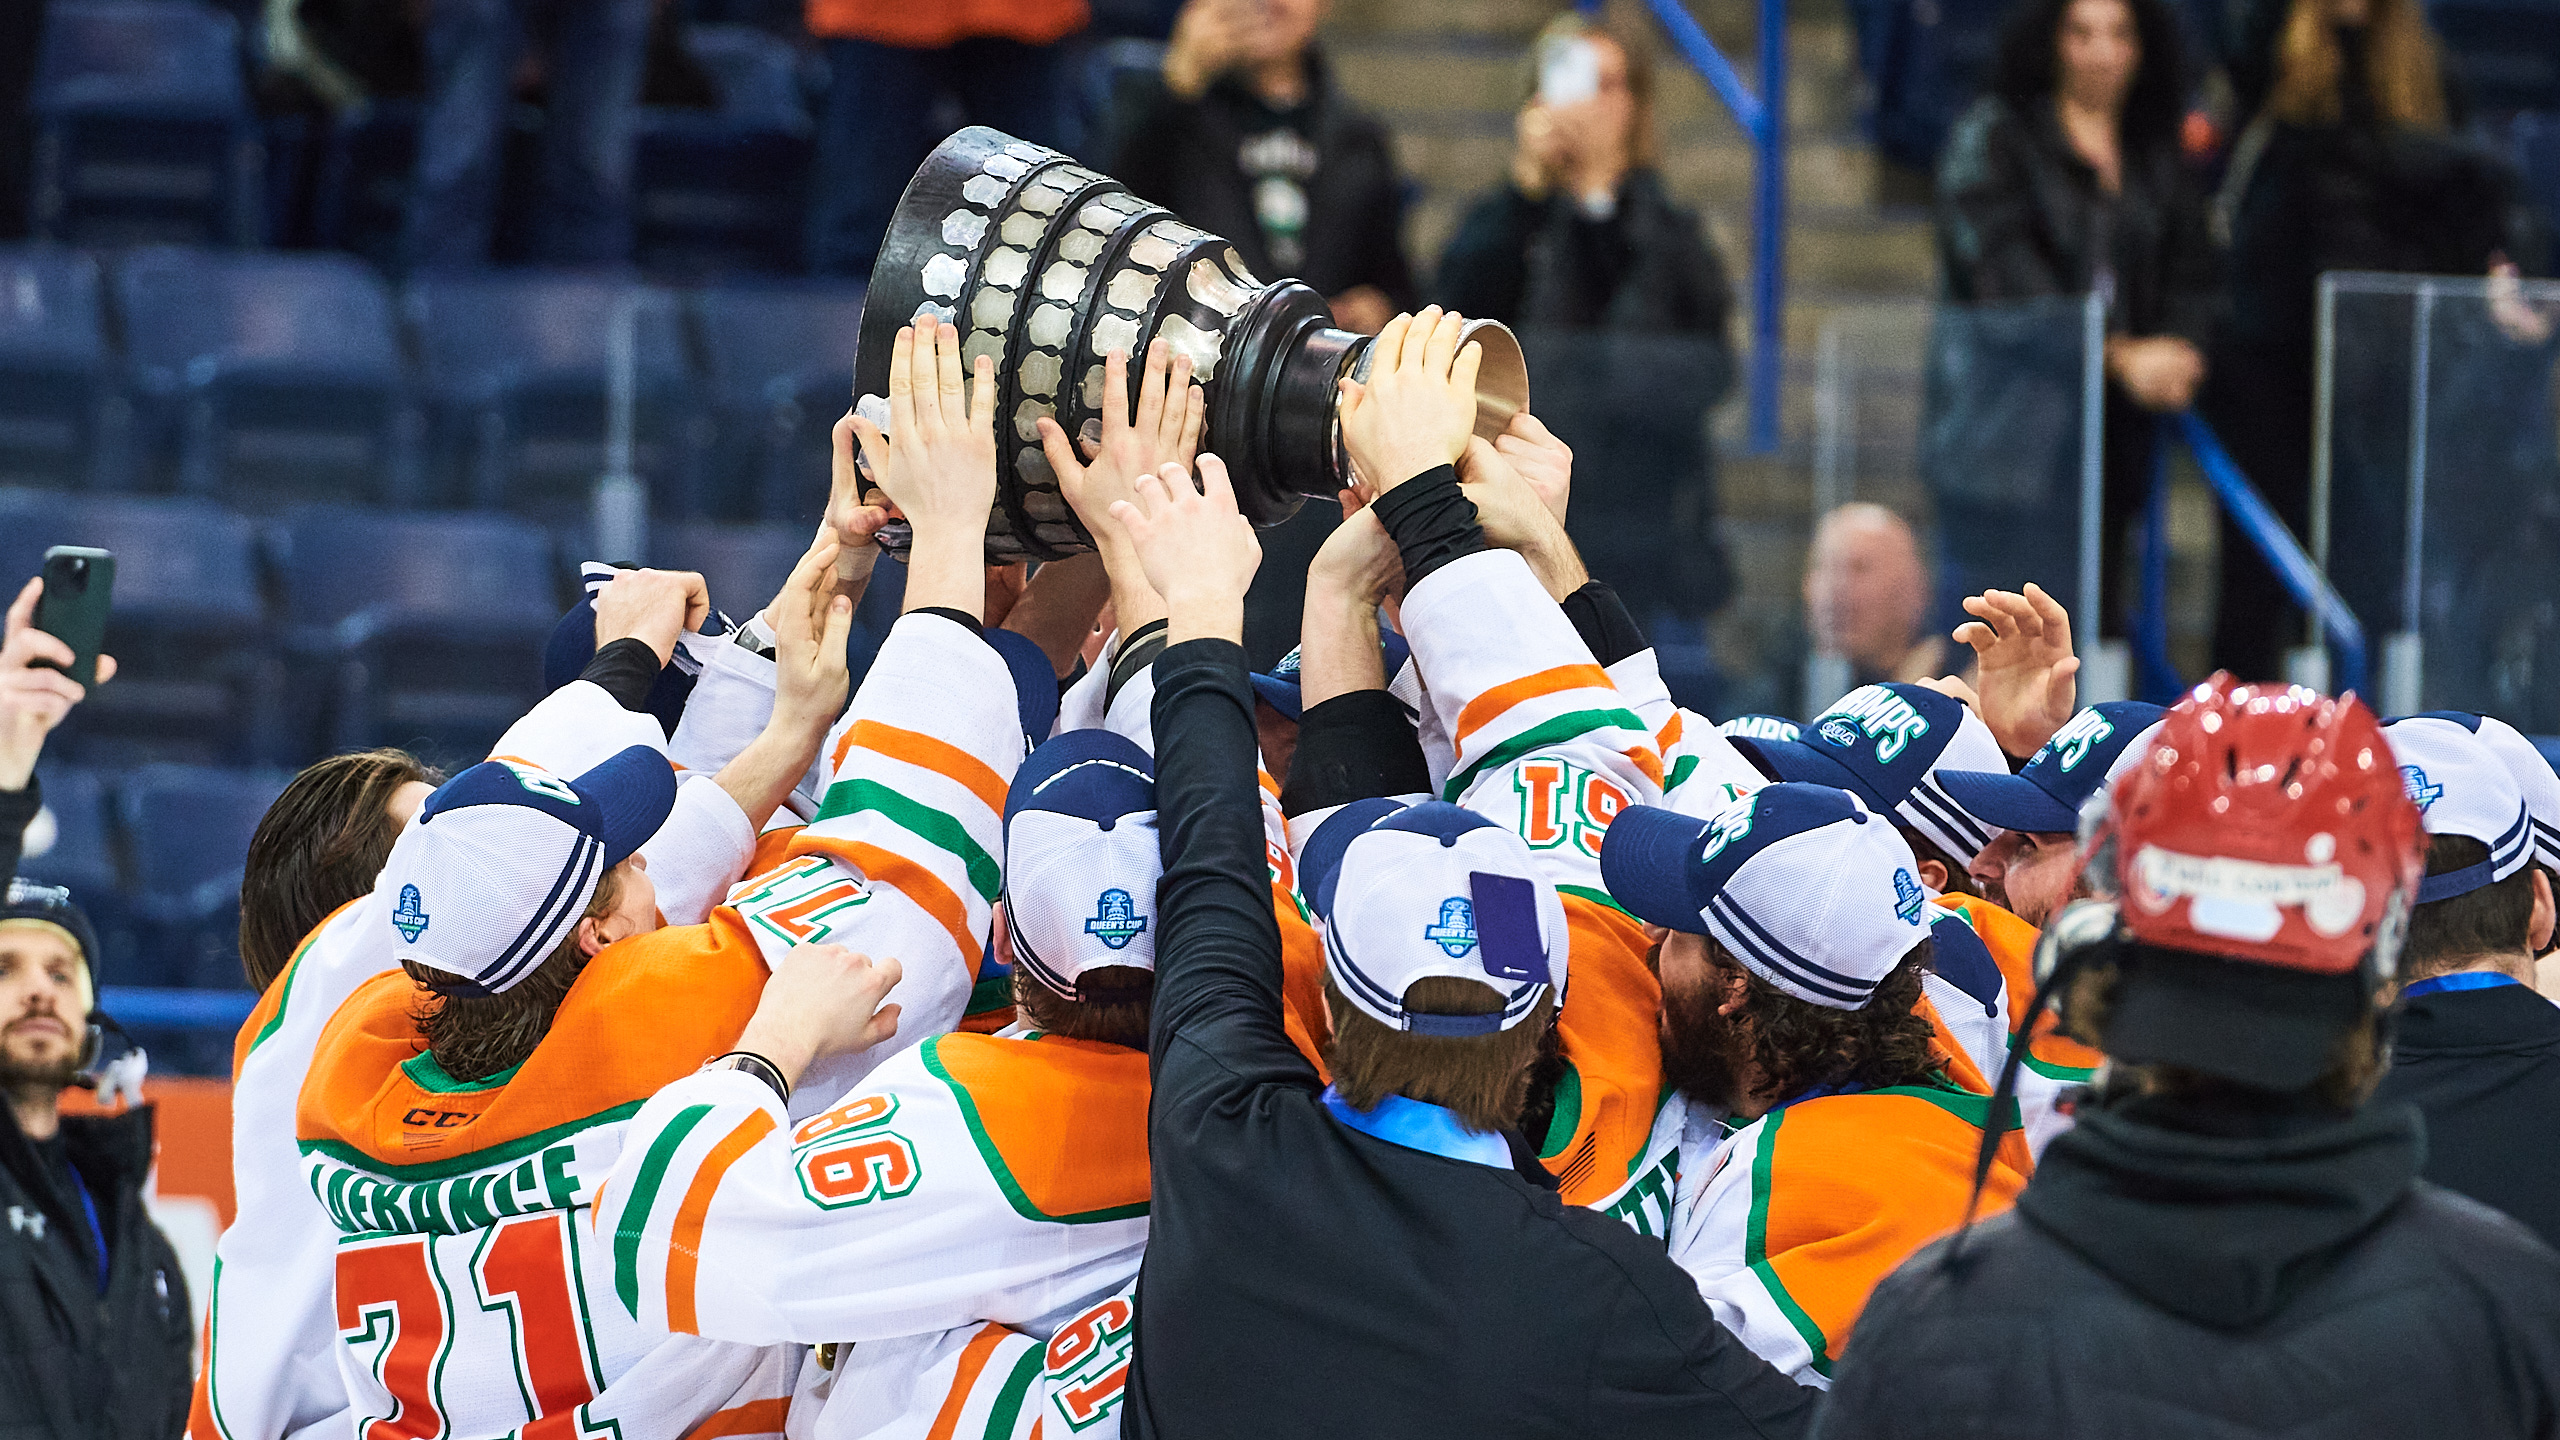 UQTR lifts the Queen's Cup as many players and staff touch the trophy